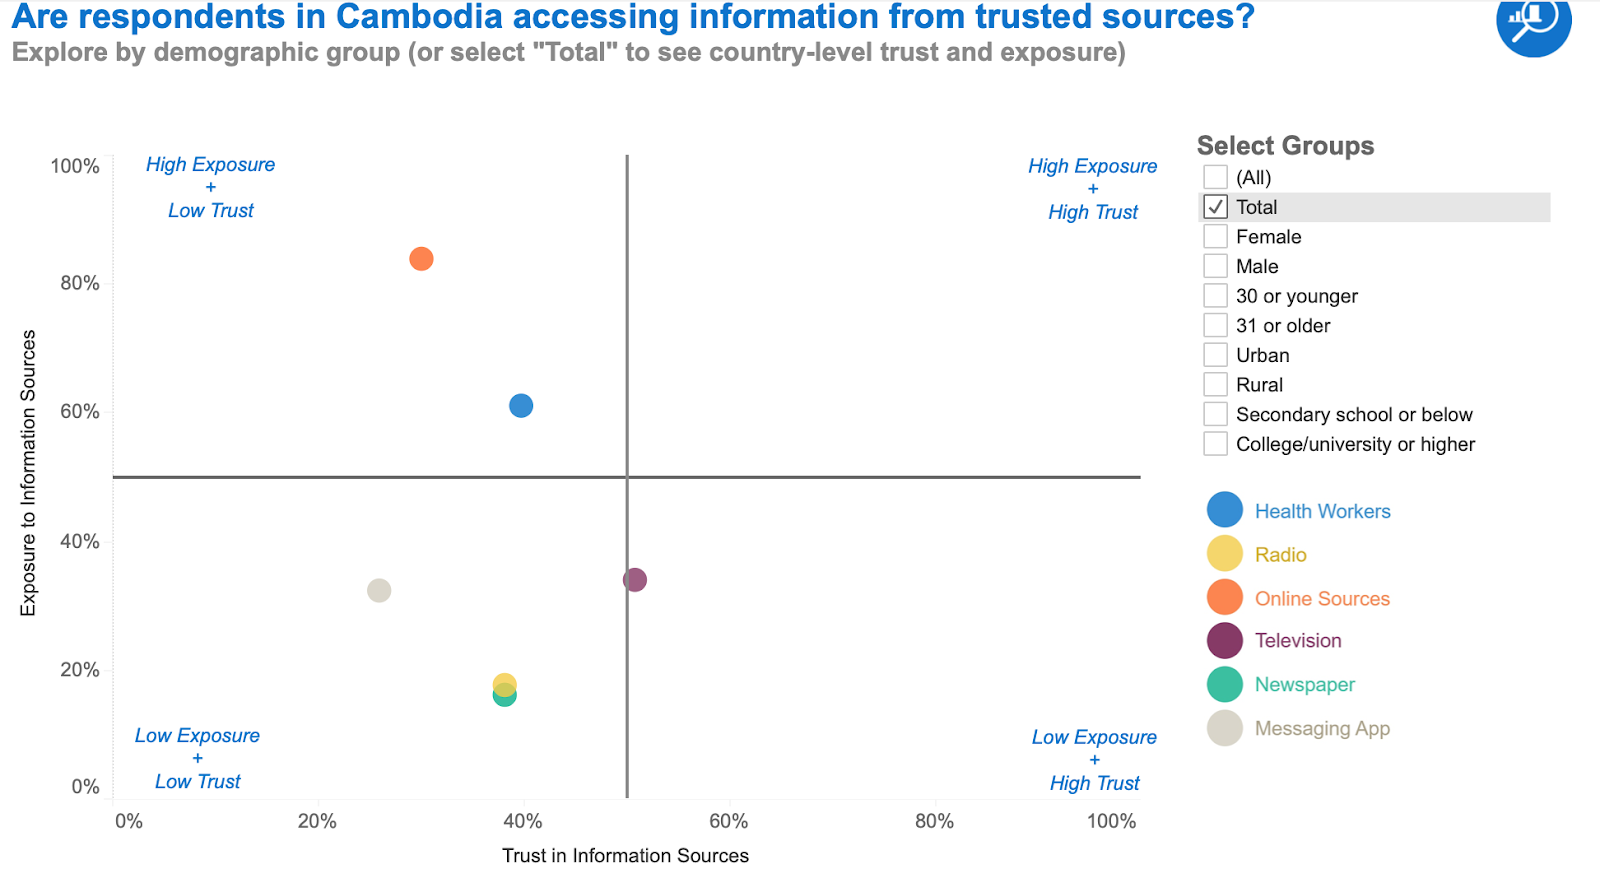 Are respondents in Côte d'Ivoire accessing information from trusted sources?